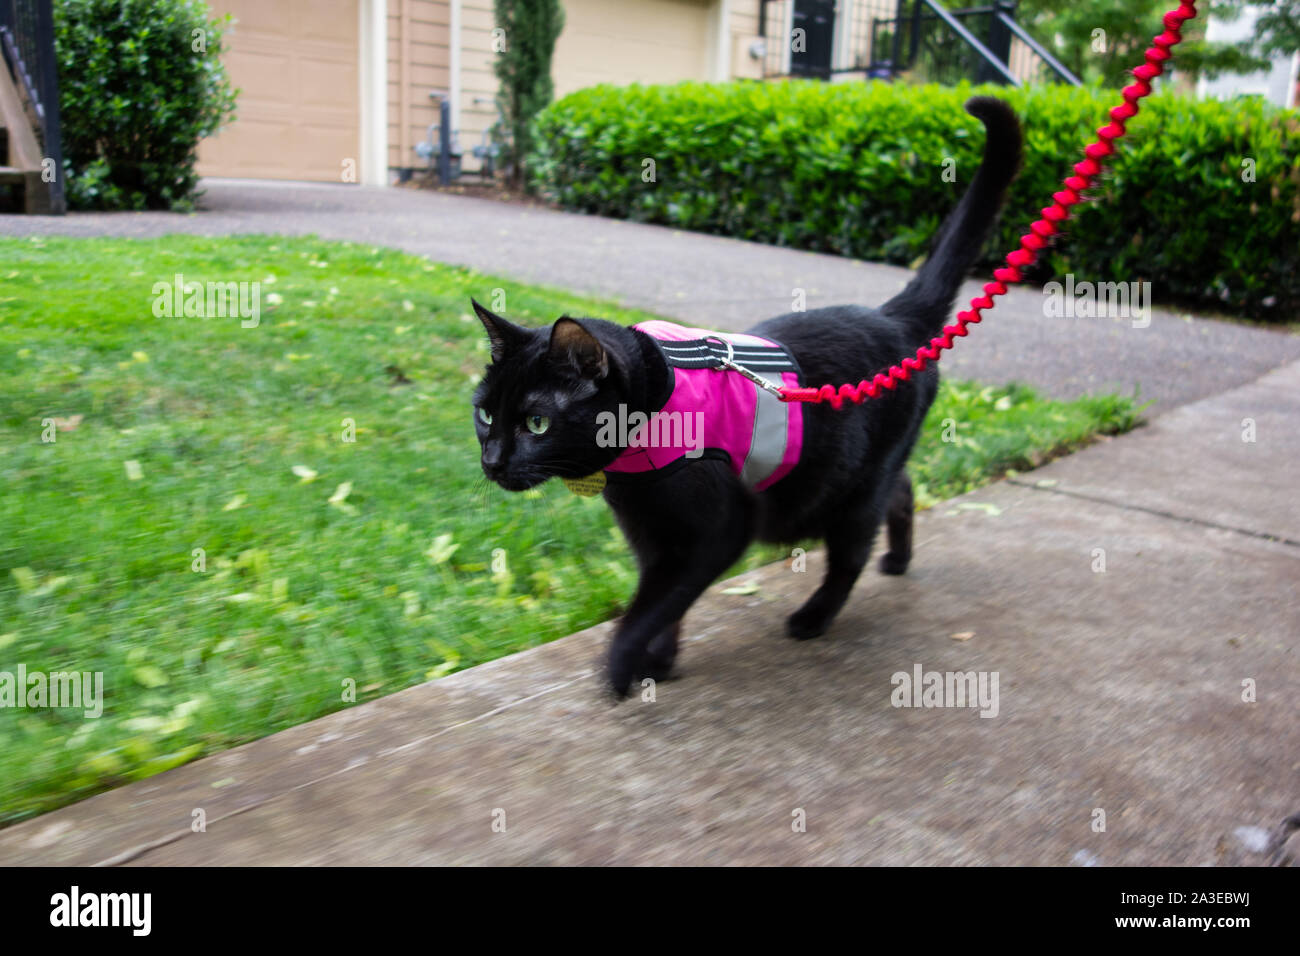 A black cat on a leash wearing a  pink vest harness,  quickly walking down a sidewalk Stock Photo